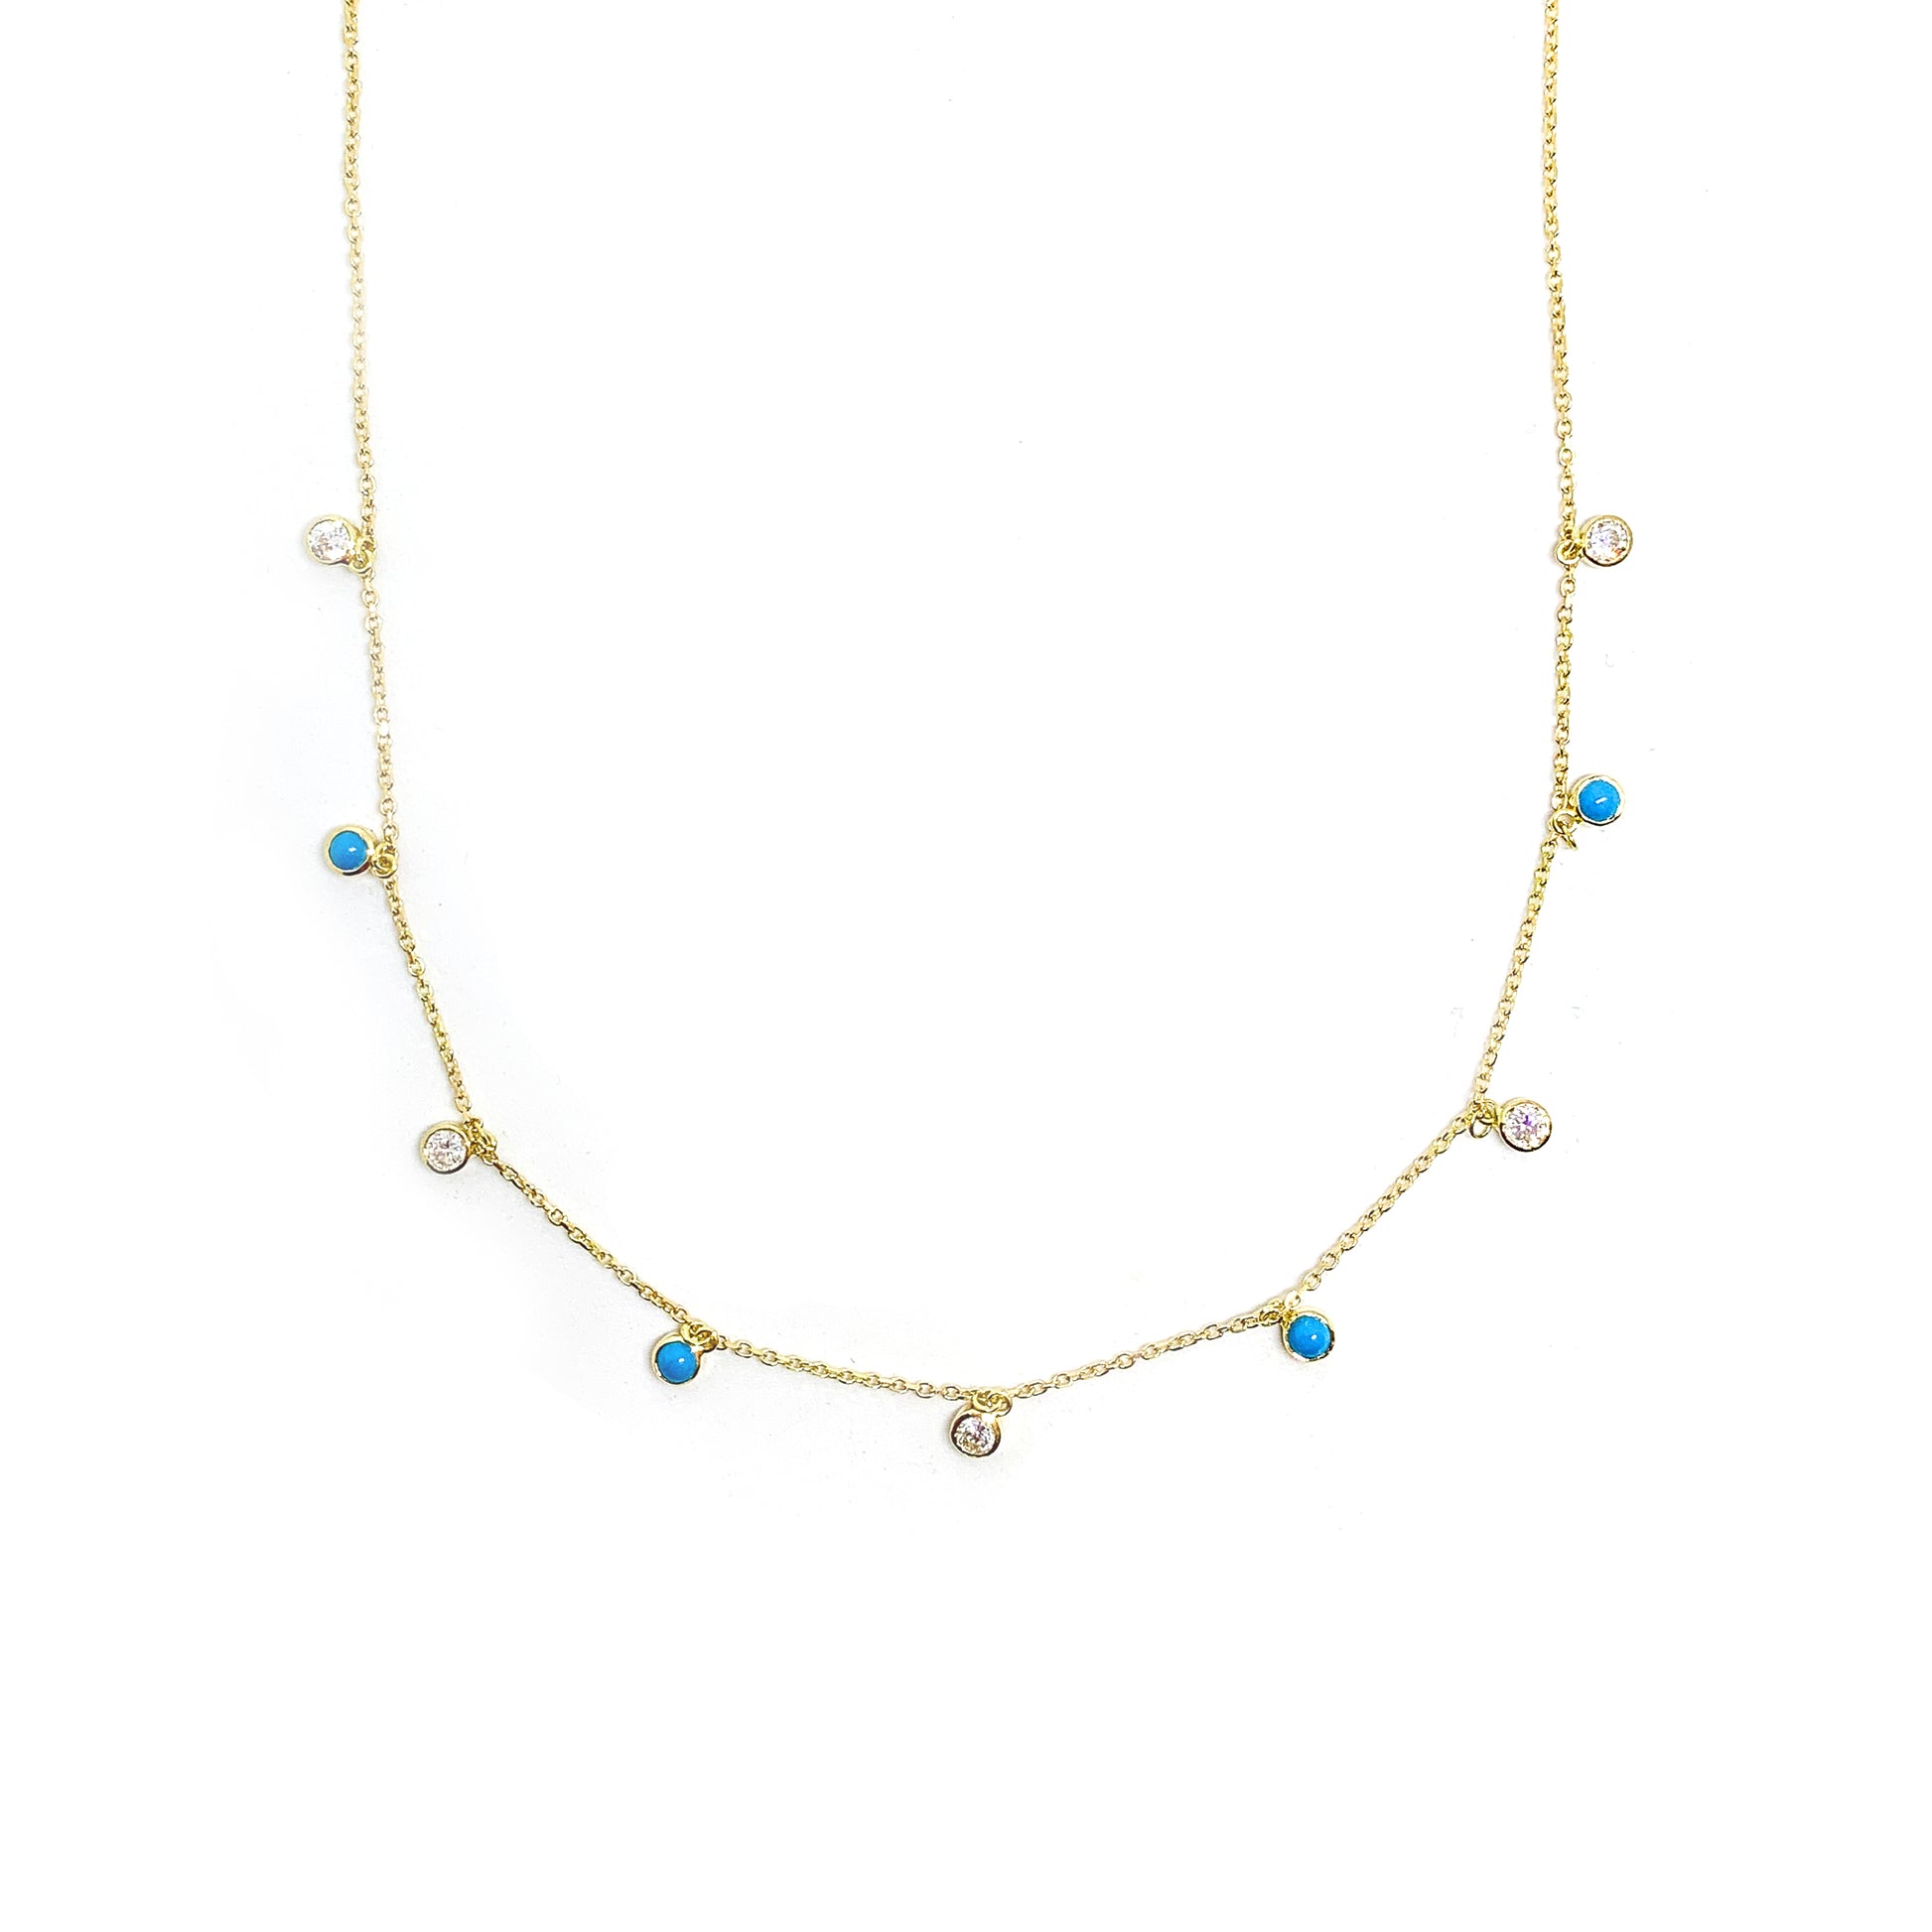 turquoise drop choker/necklace